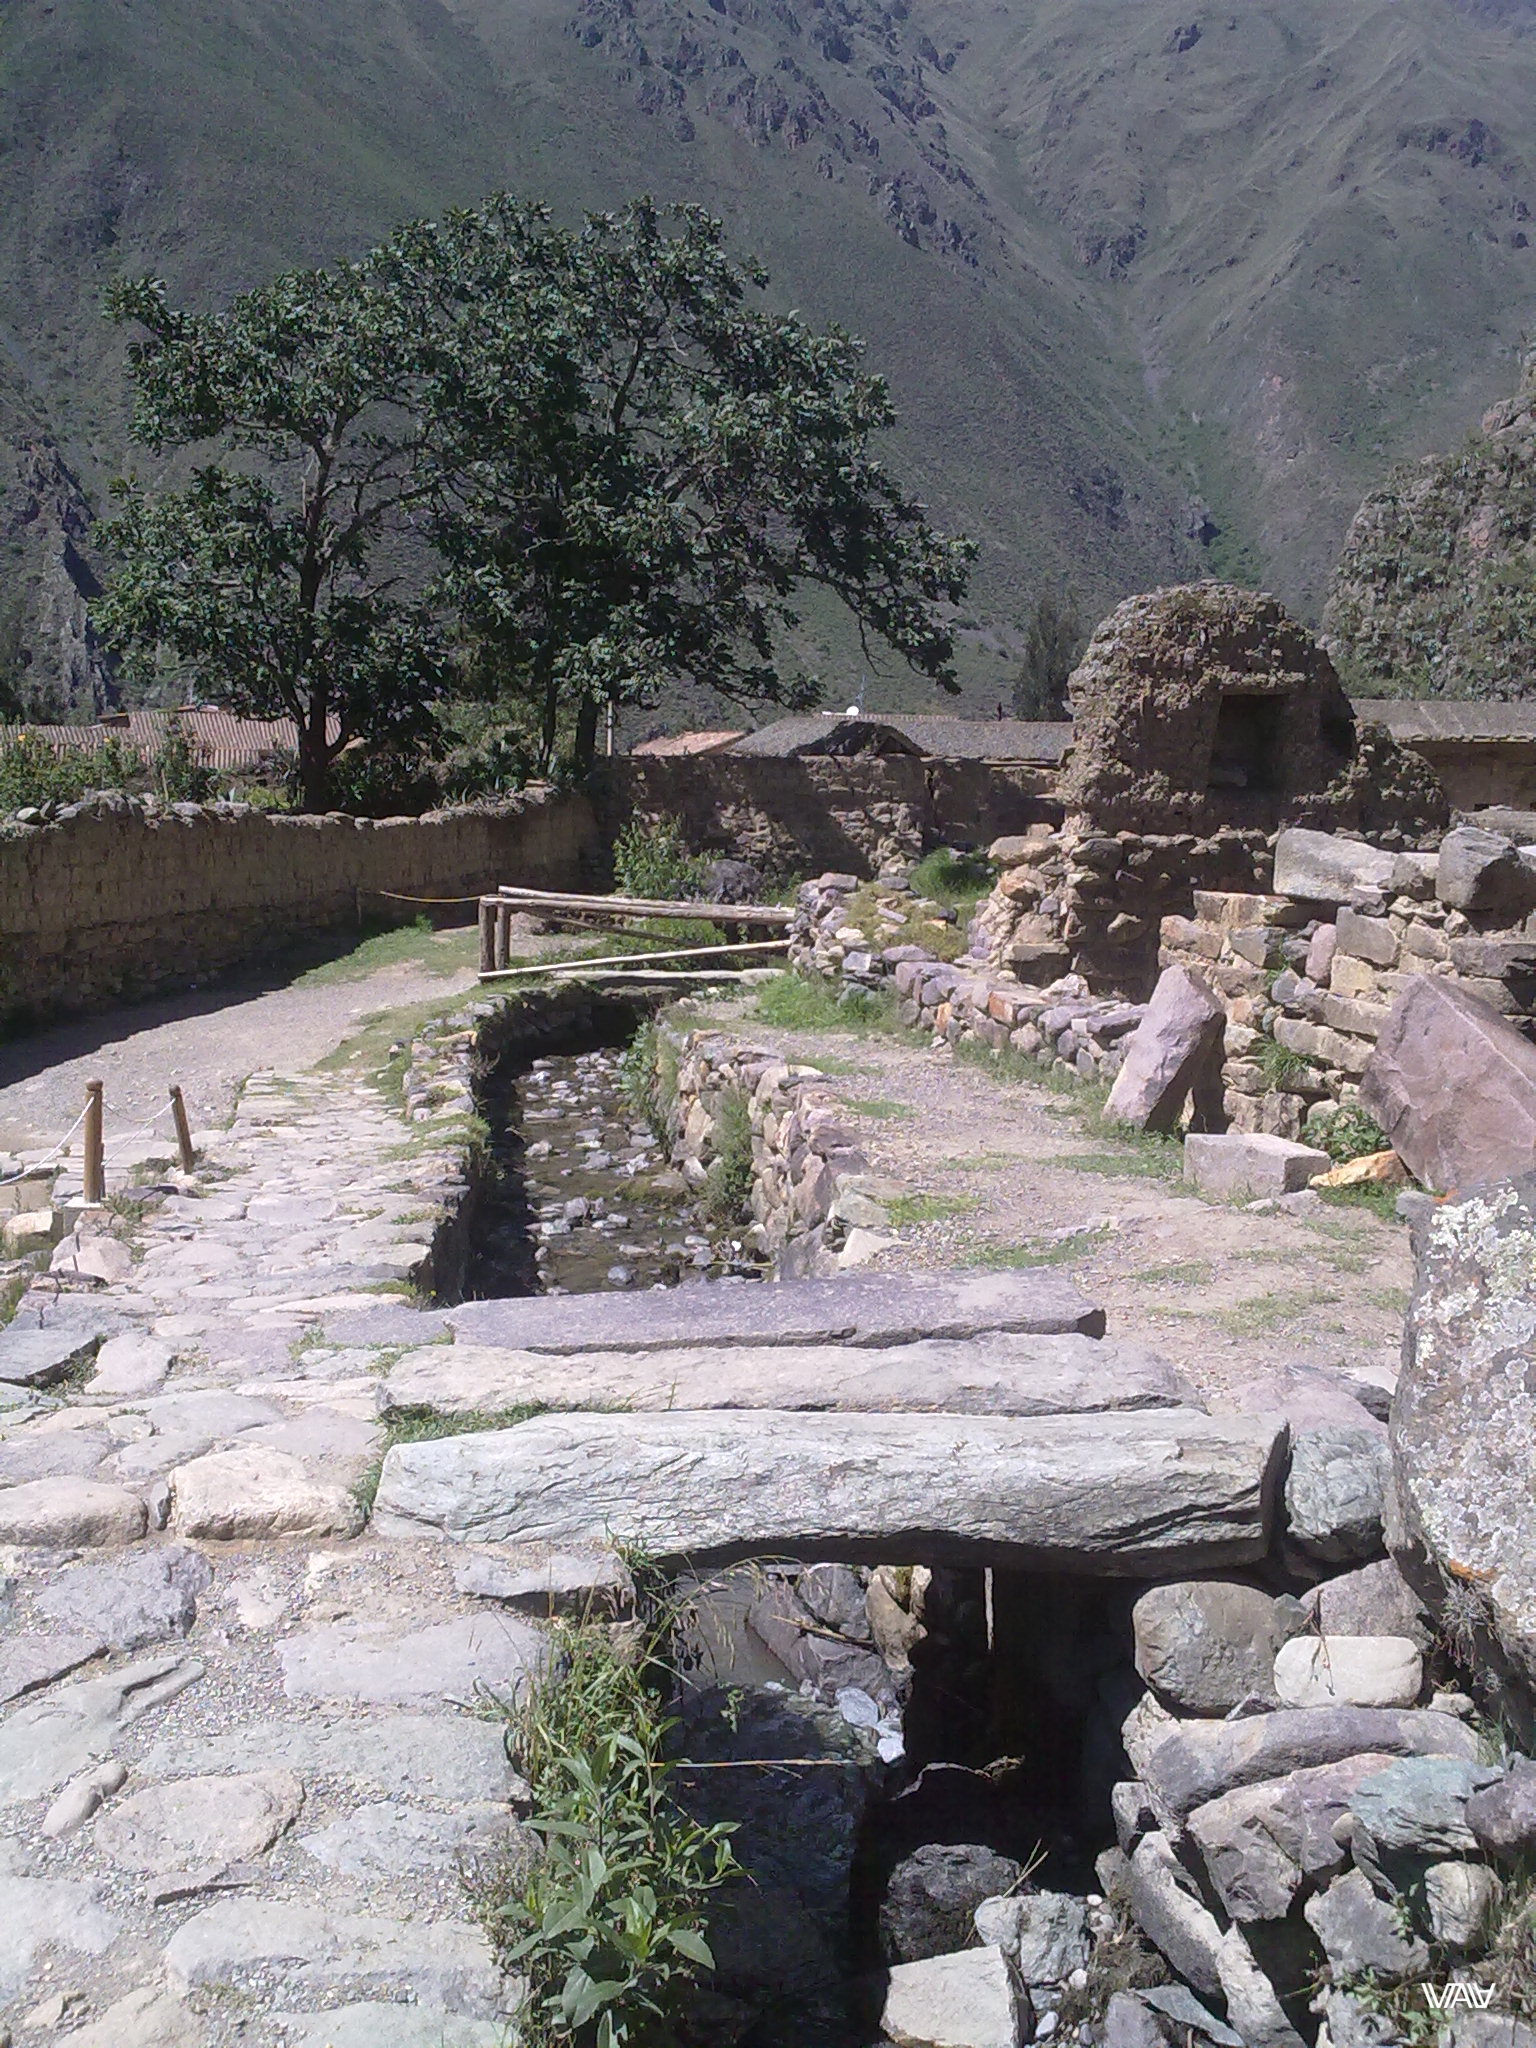 The houses of the ancient Peruvians went deep into the earth. Ollantaytambo, Peru